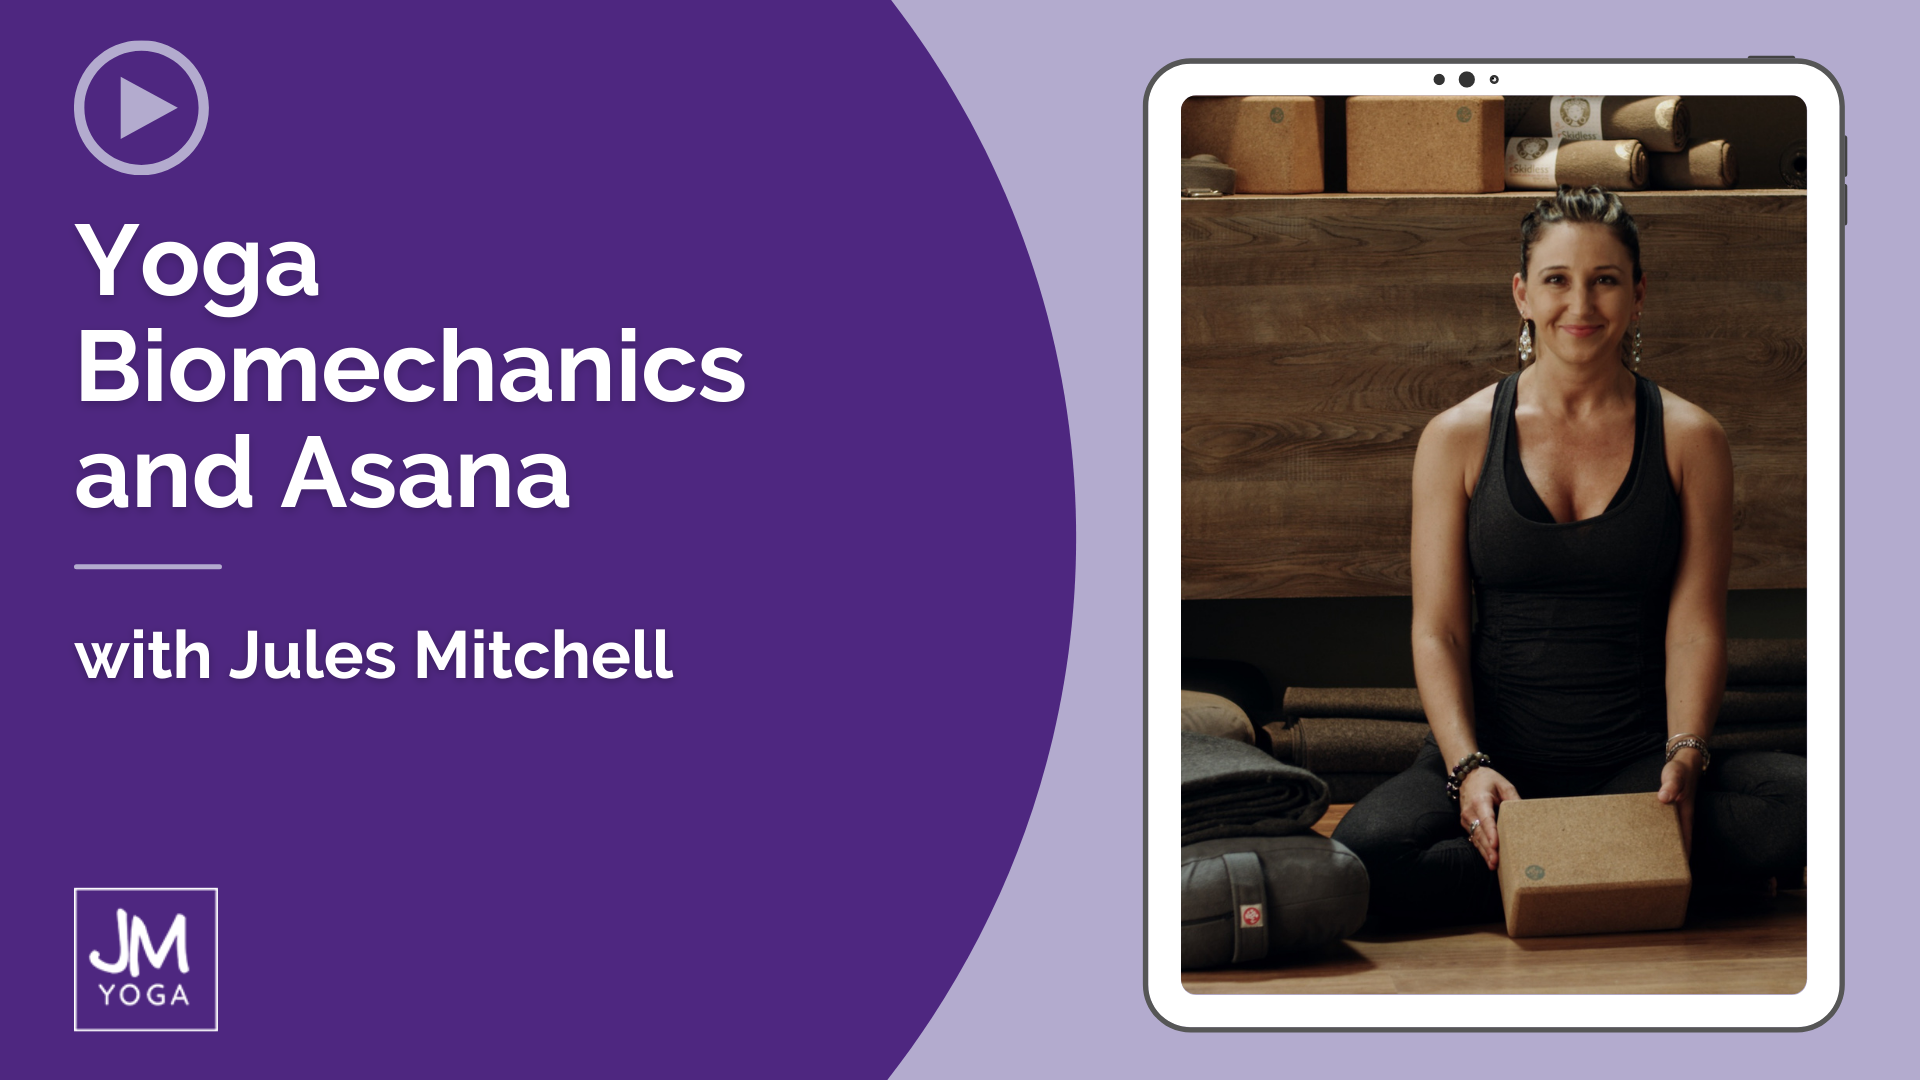 Product graphic in two shades of purple. Yoga Biomechanics and Asana with Jules Mitchell.